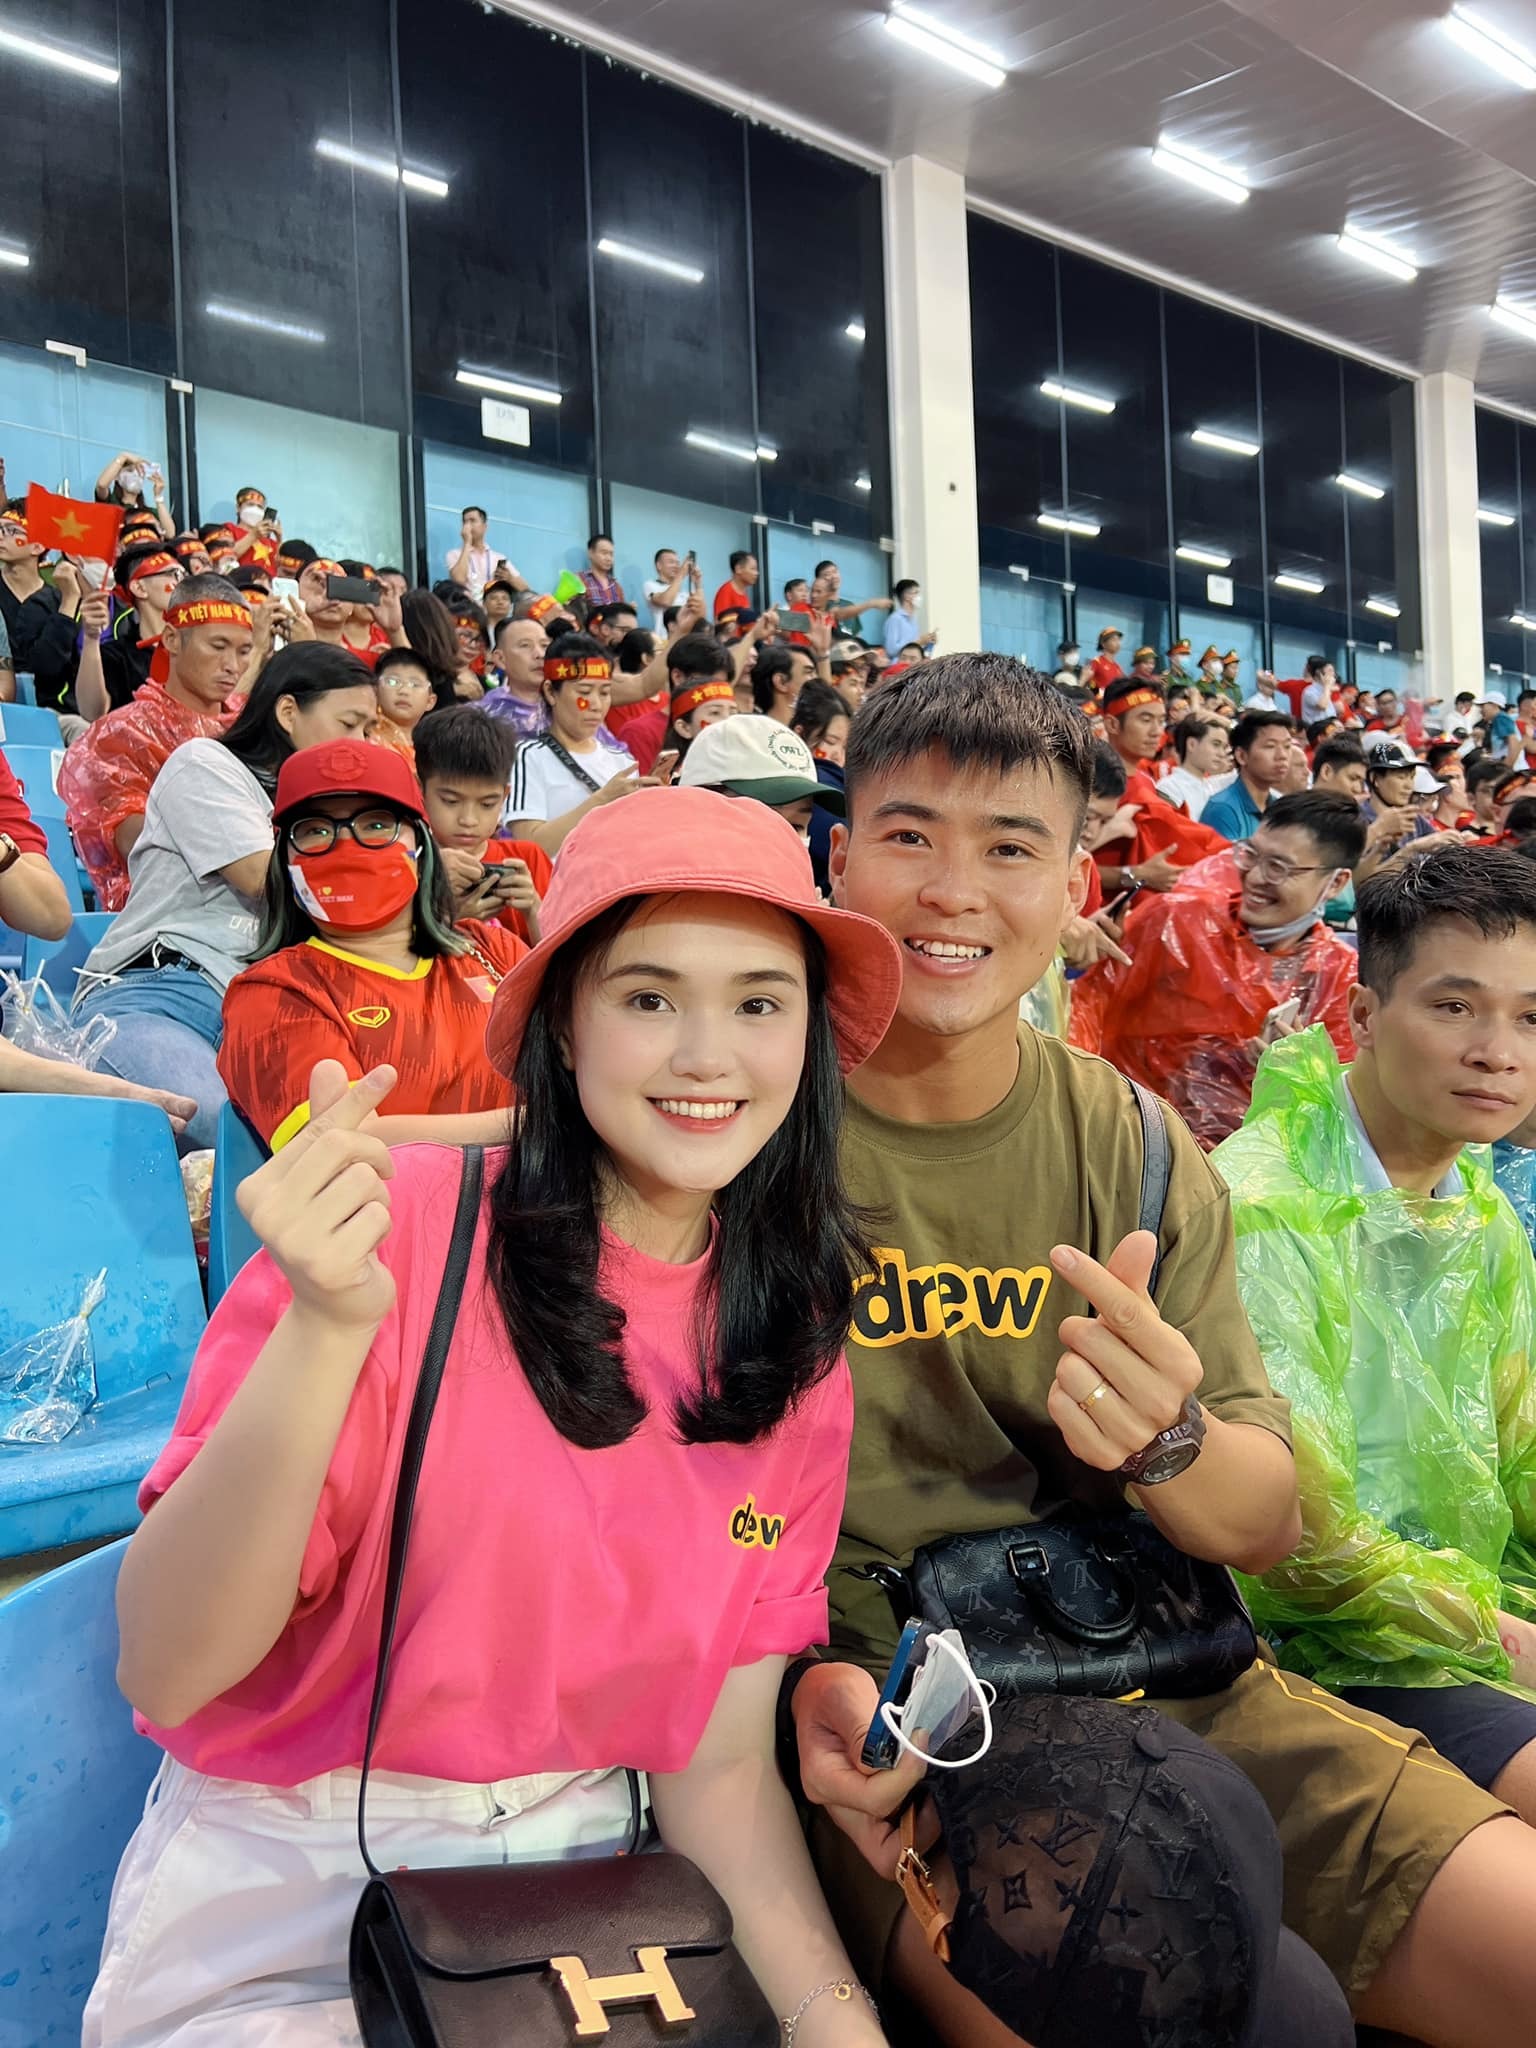 Quynh Anh's wife decided to 'go storm' for 6 days and 6 nights to celebrate the 31st SEA Games gold medal, Duy Manh declared a definitive sentence!